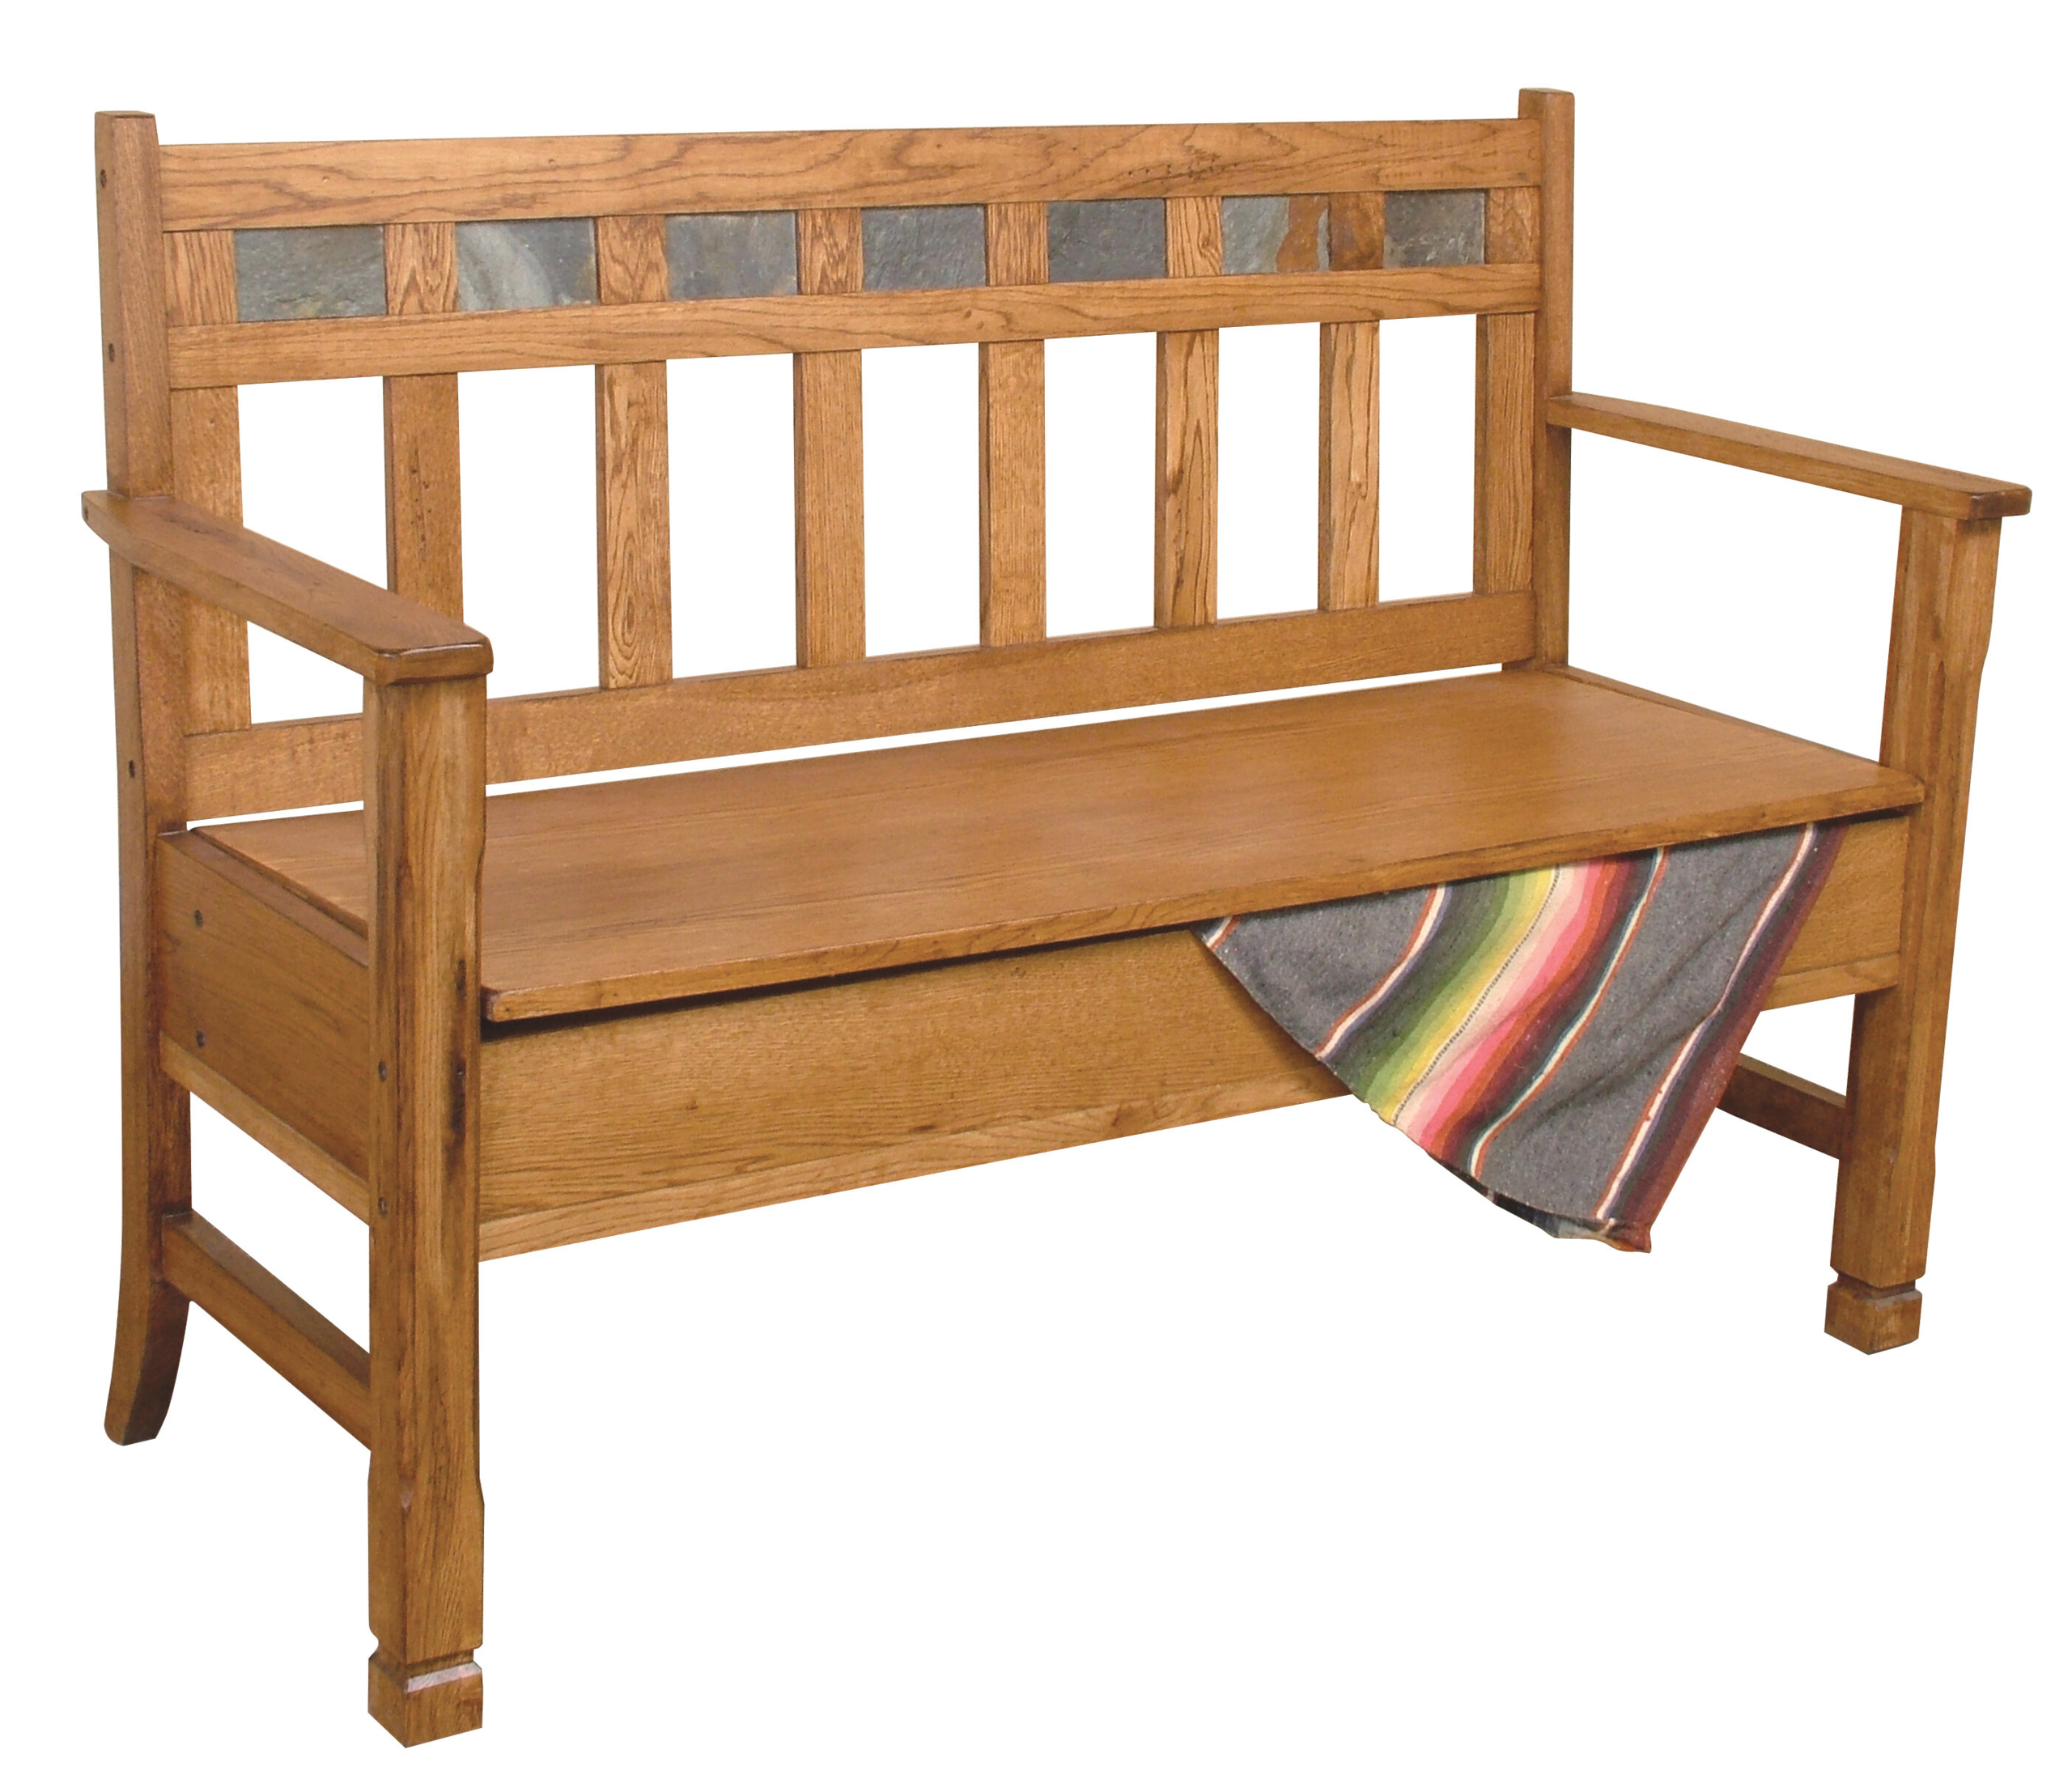 Mission style bench with shoe storage